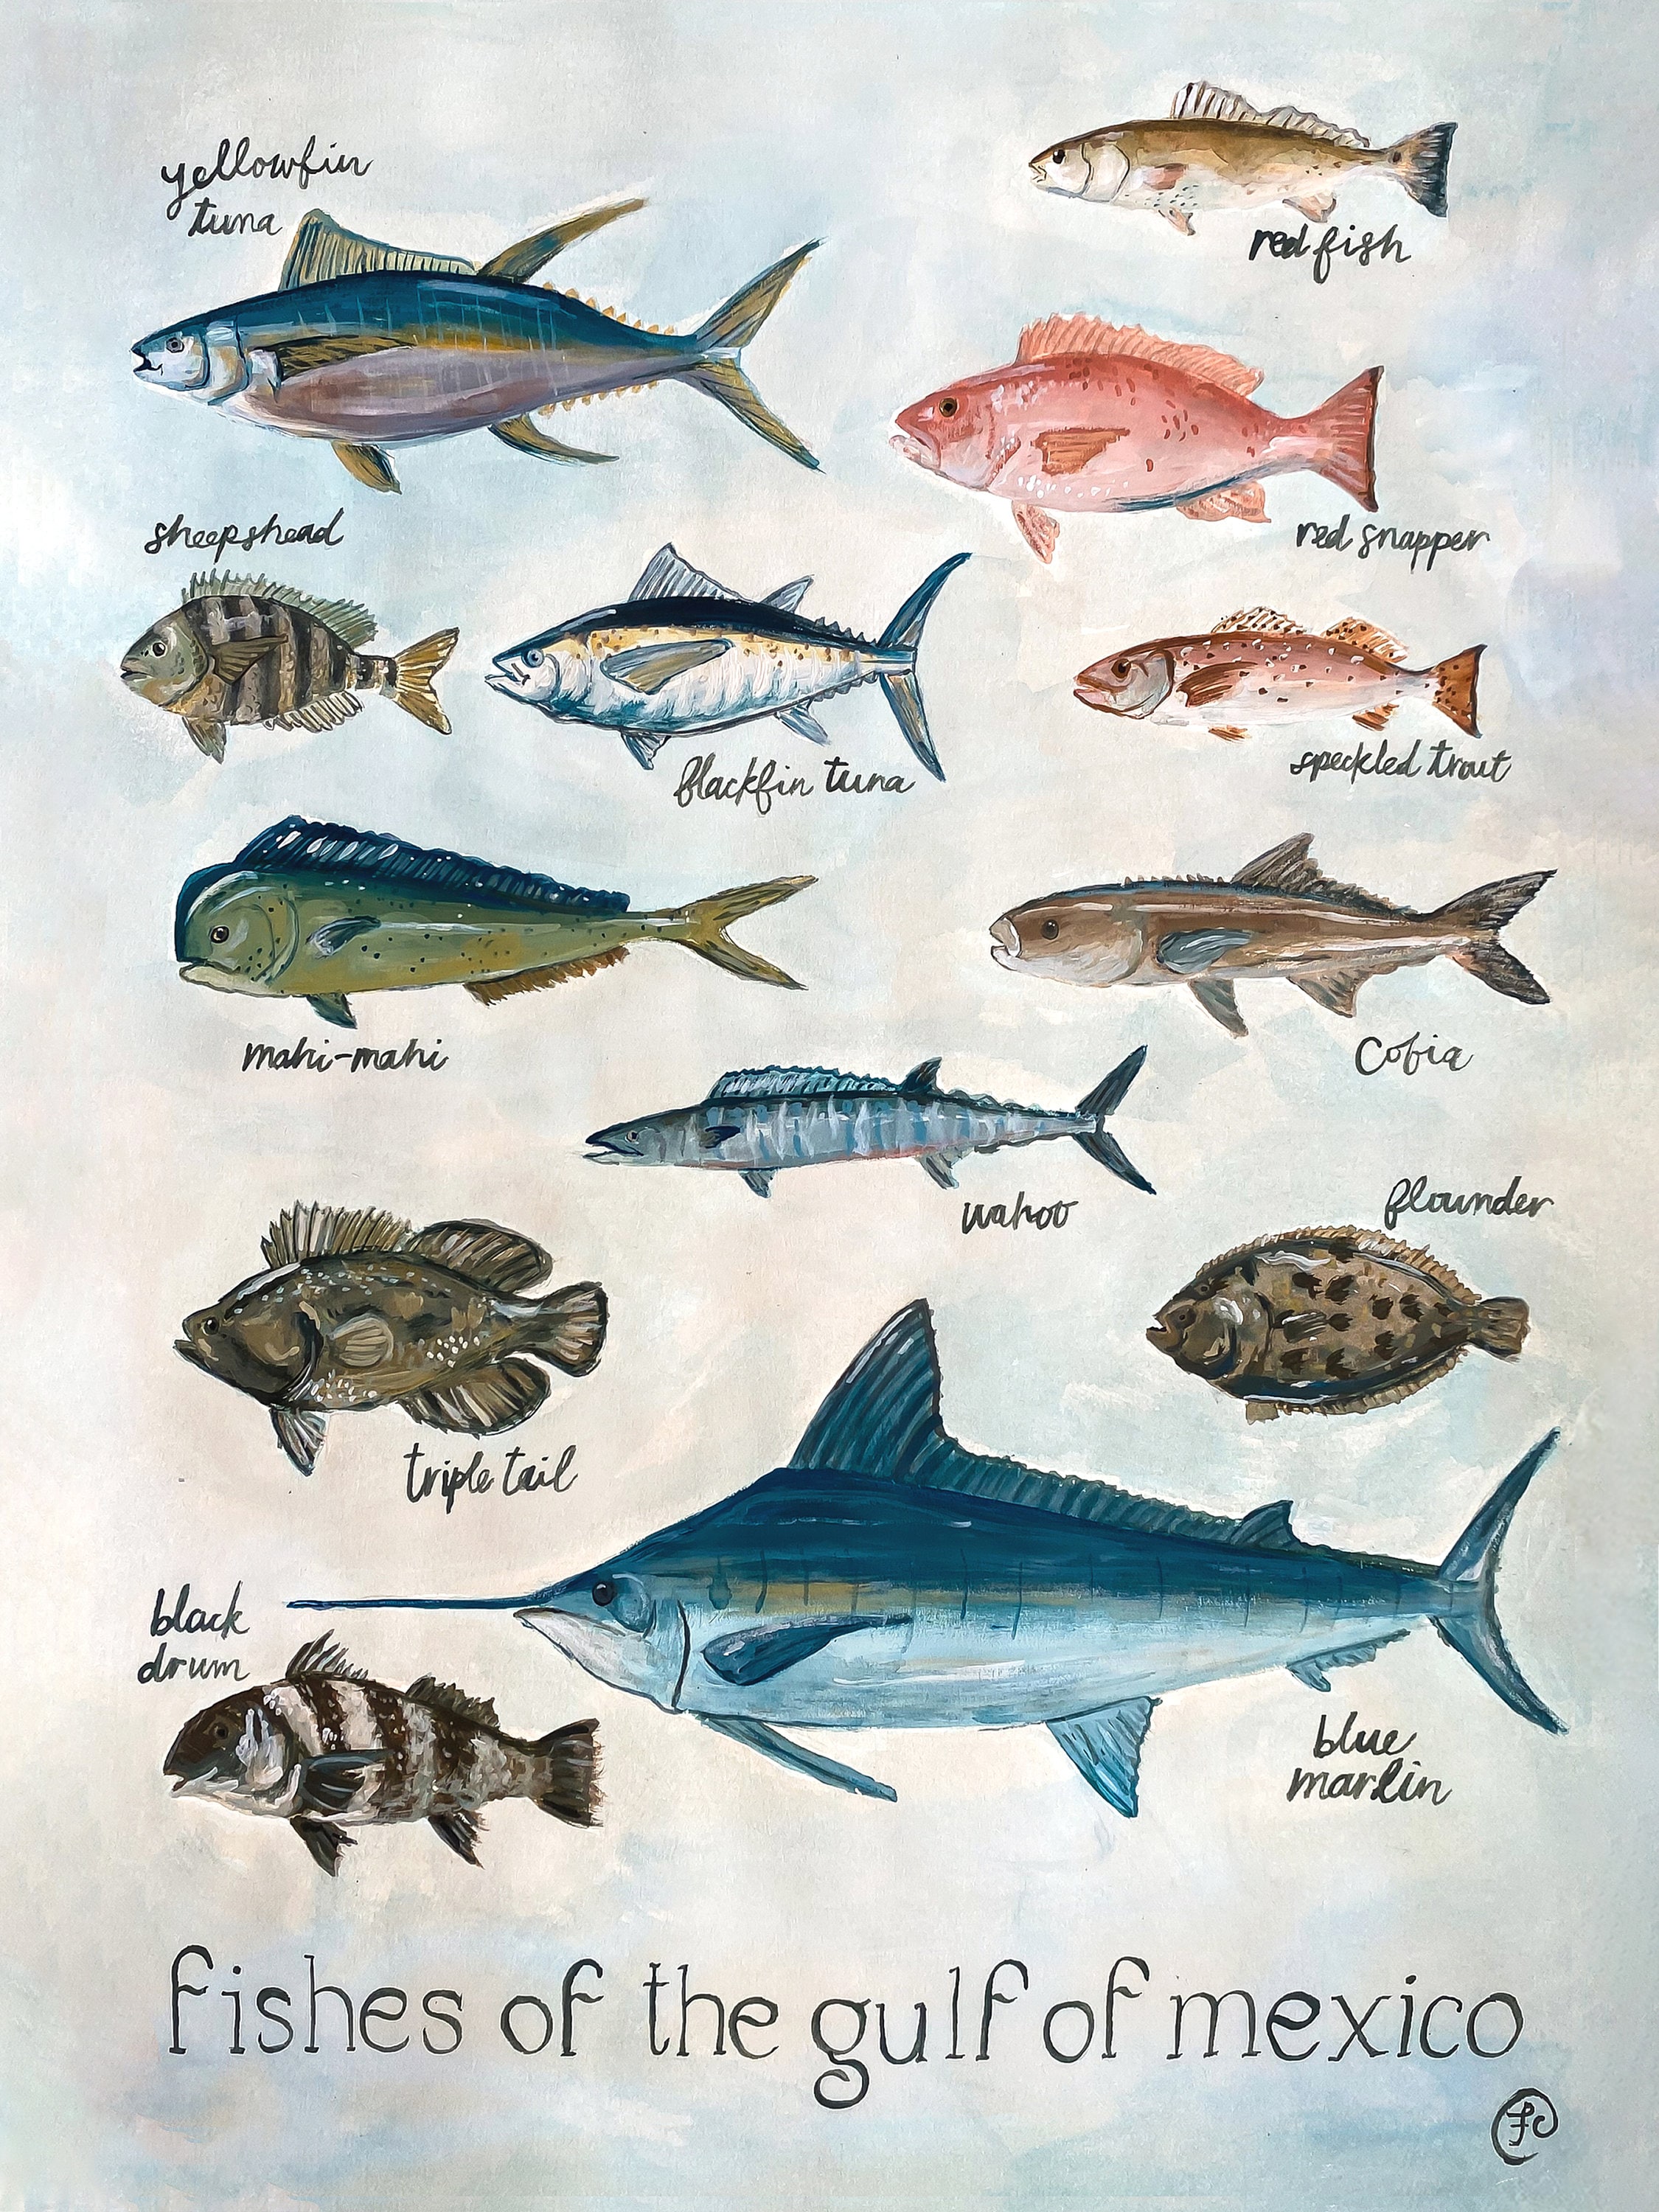 Recommended minimum marine reserve length (km) required for 63 fish